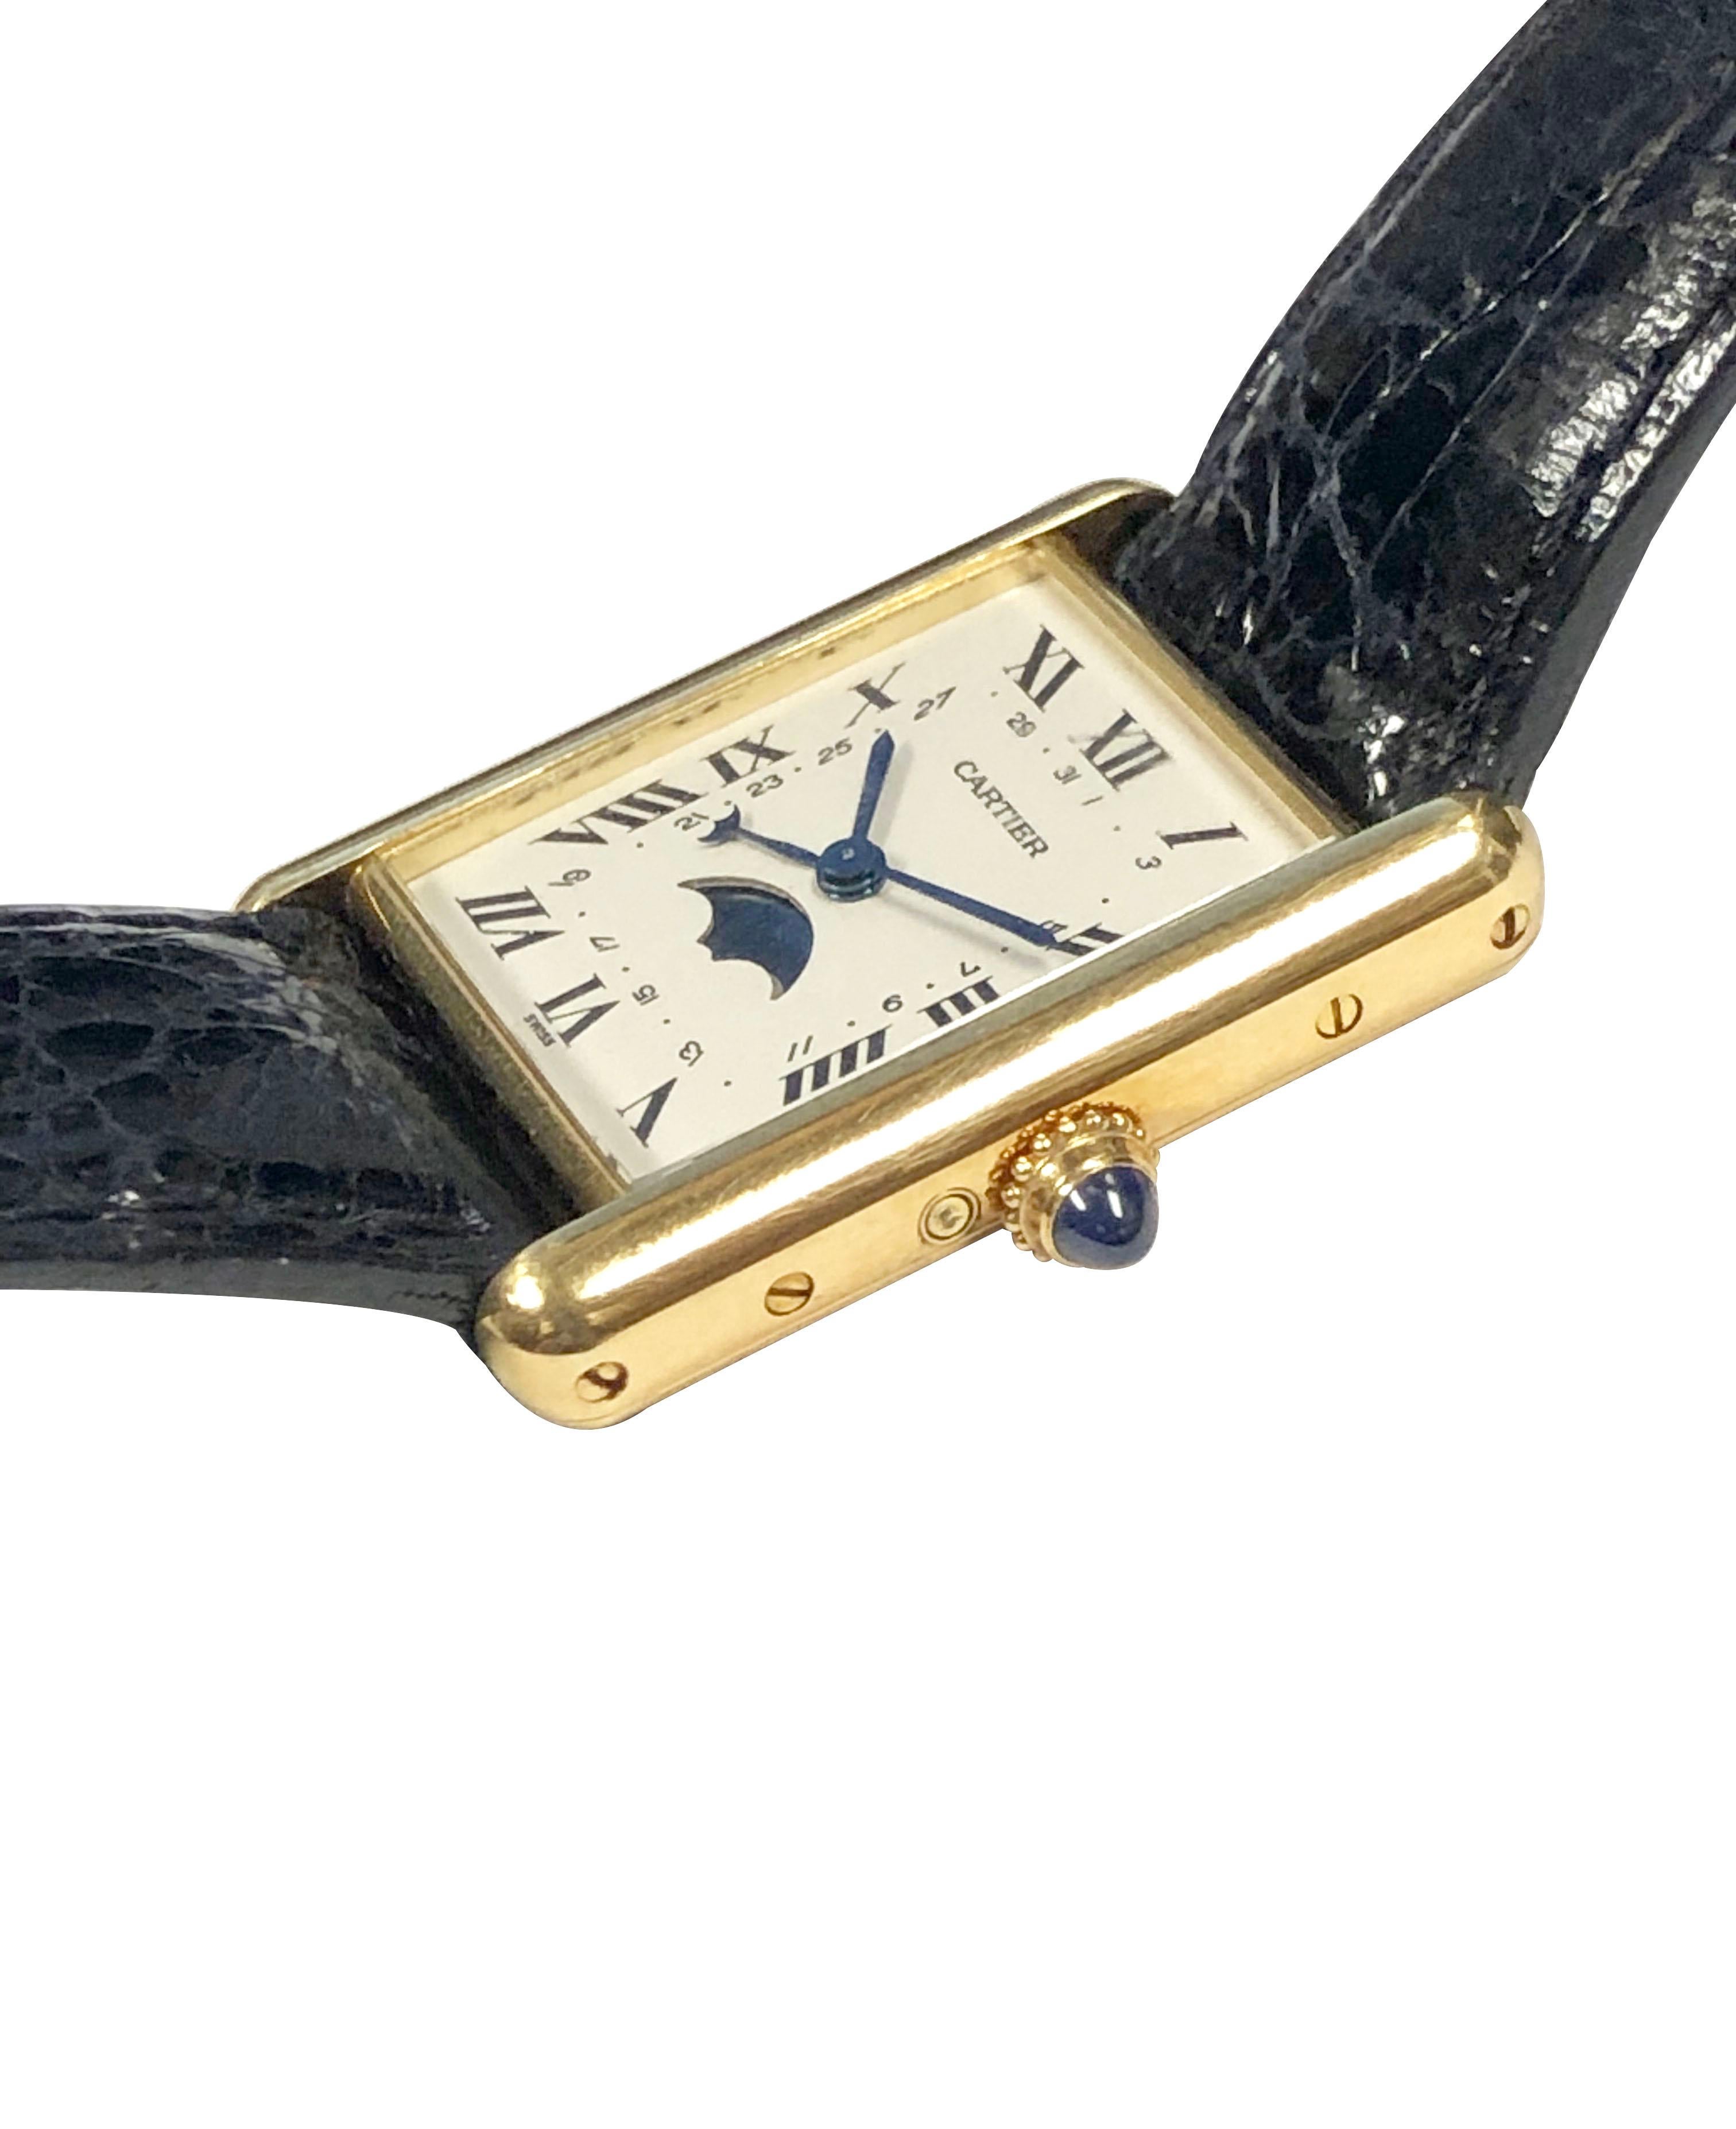 Circa 2000 Cartier Classic Tank Wrist Watch, 30 X 23 M.M. 18K Yellow Gold 2 piece case. Sapphire Crown, Quartz movement, MoonPhase window at the 6 position and inner Calendar track.  Original Cartier Black Crocodile Strap with Cartier Gold Plate